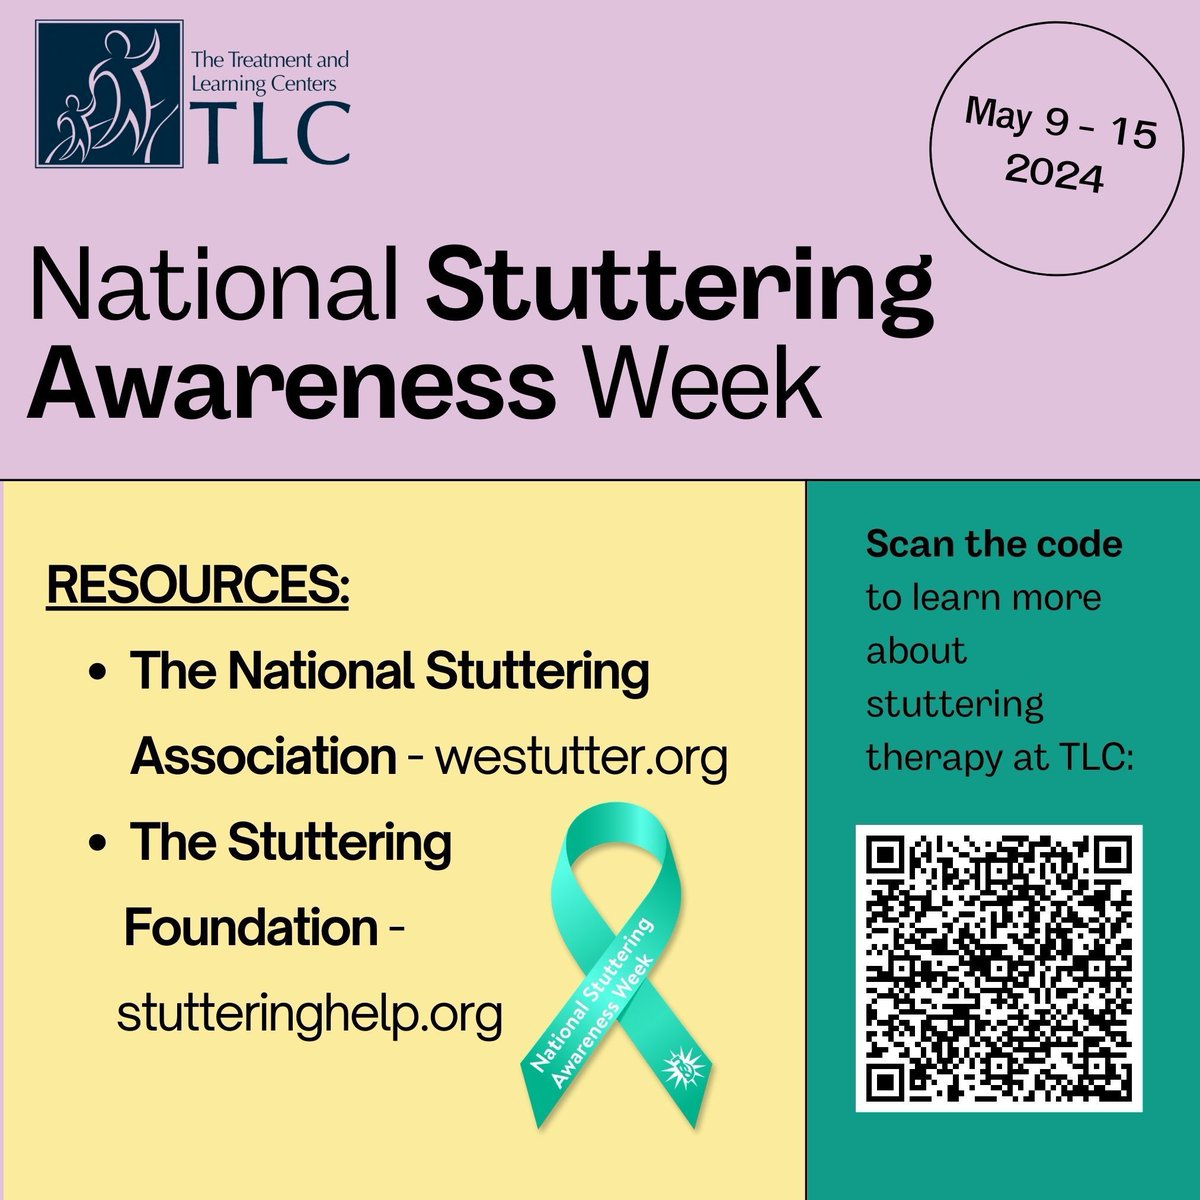 May 9-15 marks National Stuttering Awareness Week! 🗣️ Let's raise awareness and support for those who stutter. 💙 #StutteringAwarenessWeek #EndStigma